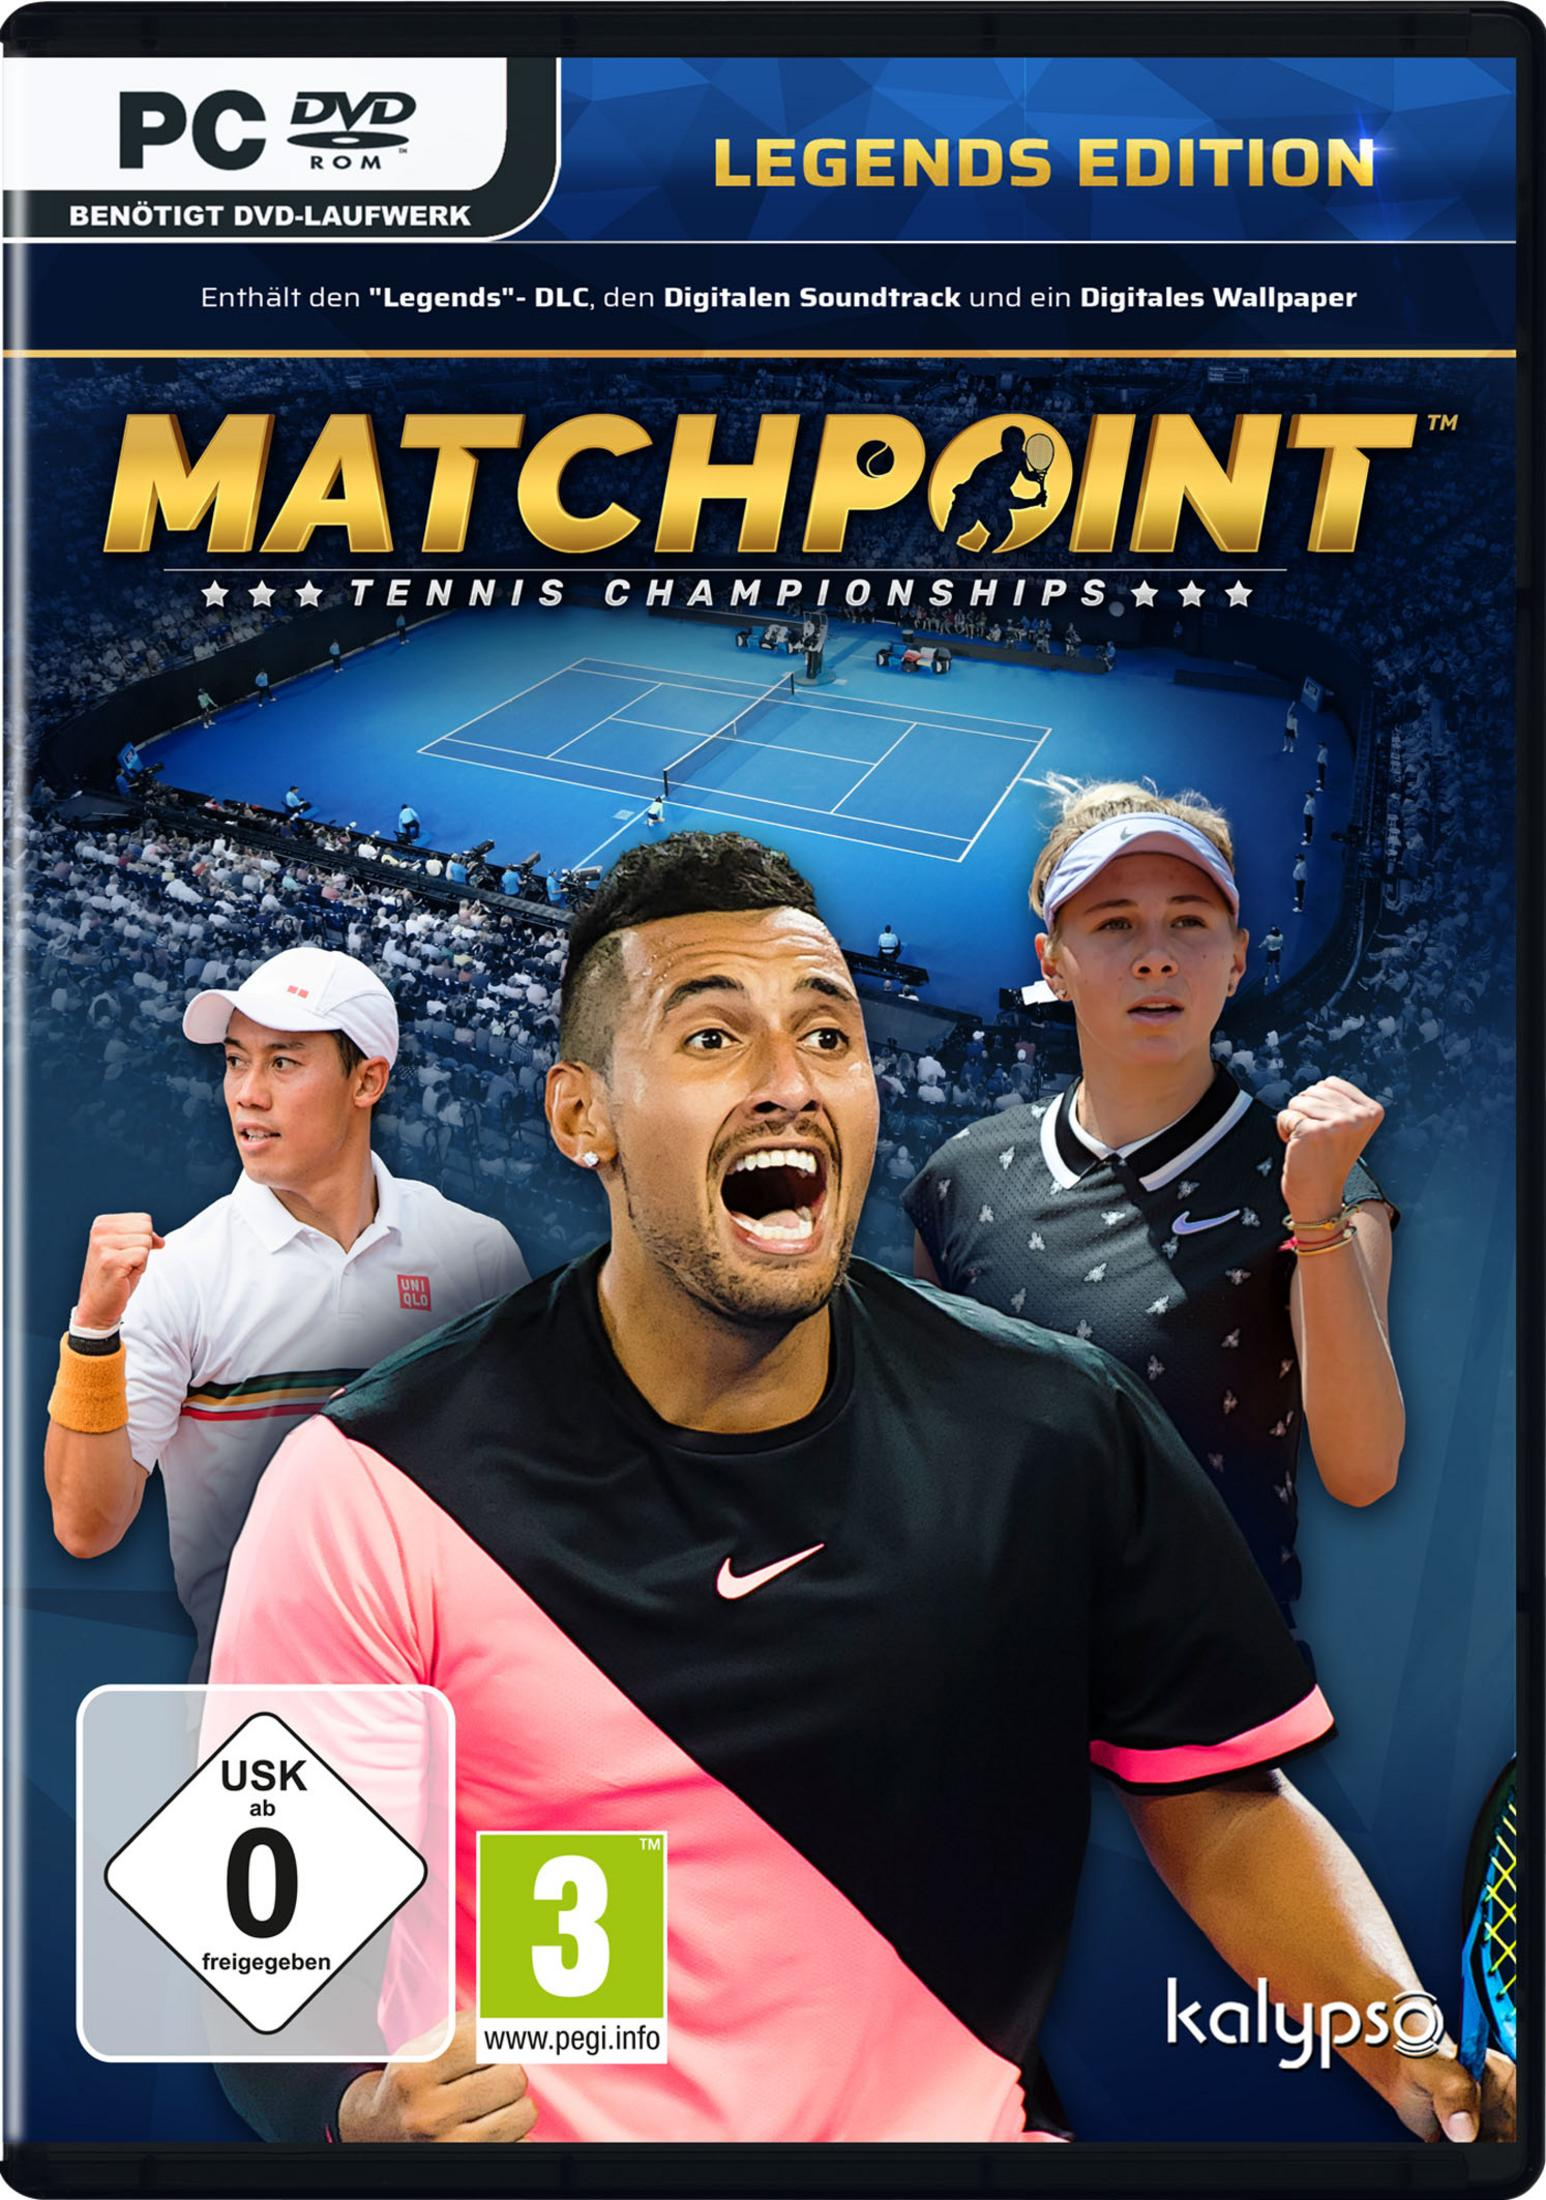 LEGENDS TENNIS EDITION - - CHAMPIONSHIPS MATCHPOINT [PC]